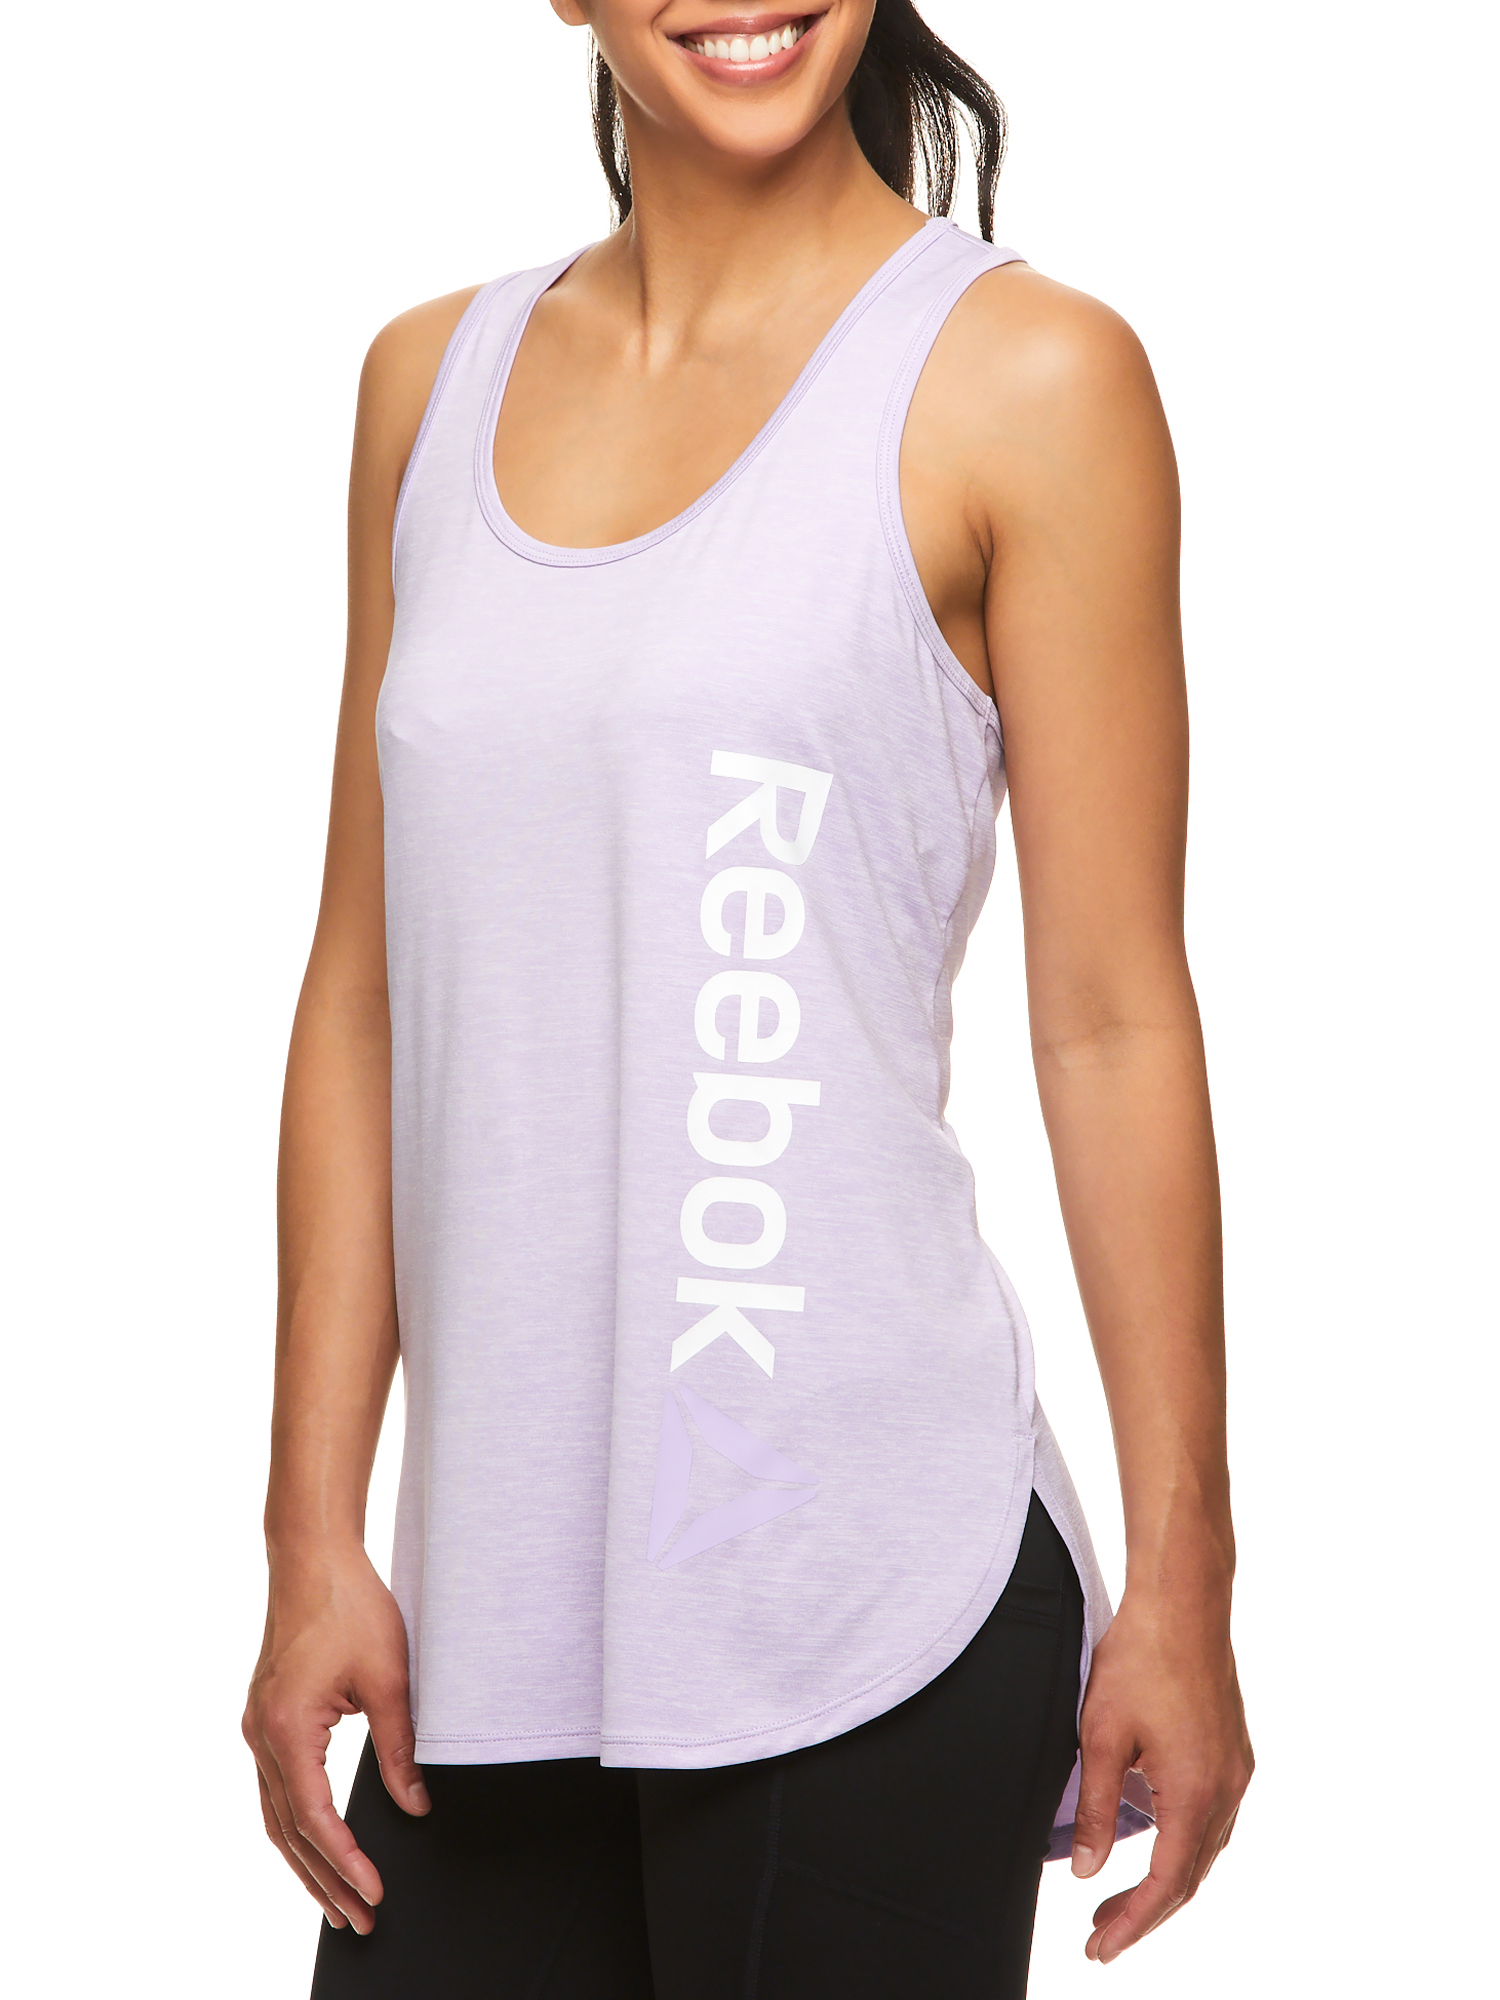 Reebok Women's Mythic Graphic Tank Top - image 2 of 4